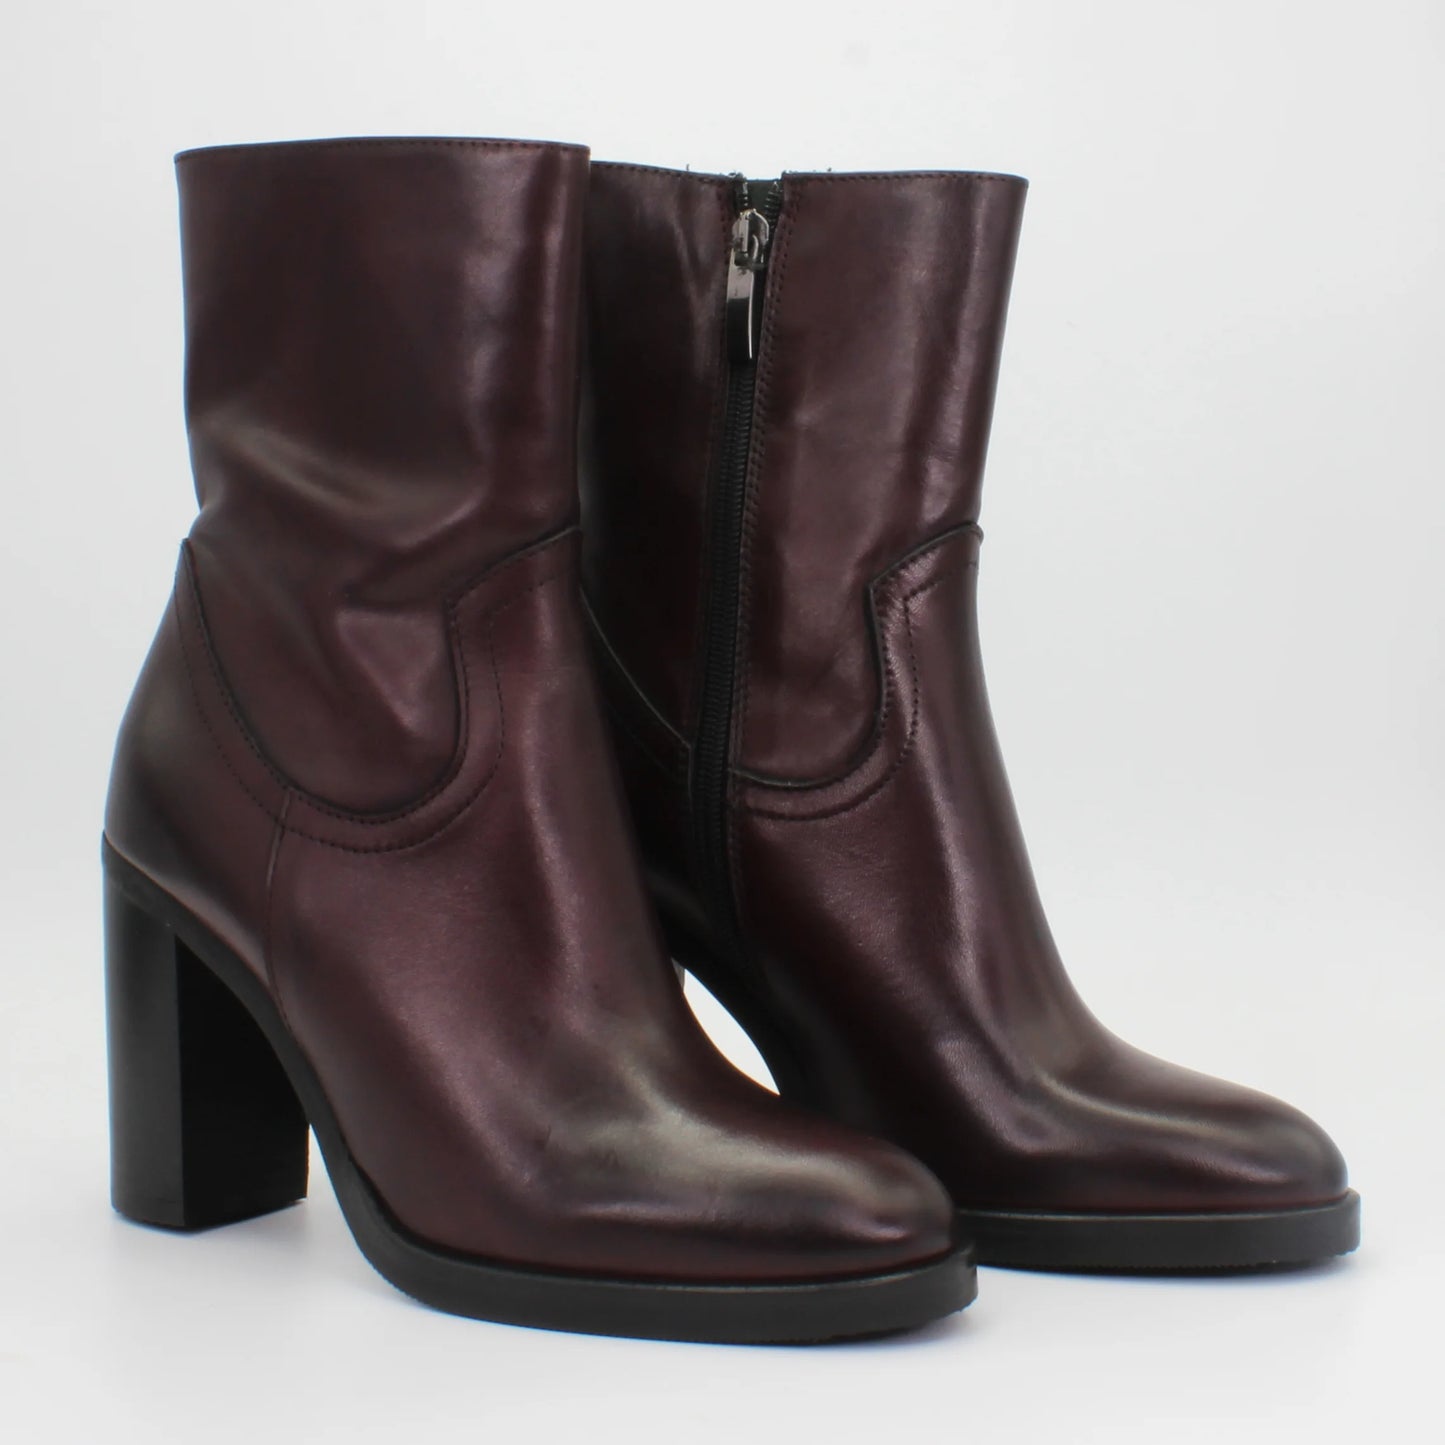 Shop Handmade Italian Leather Heeled Boot in Bordeaux (GC8553) or browse our range of hand-made Italian boots for women in leather or suede in-store at Aliverti Cape Town, or shop online. We deliver in South Africa & offer multiple payment plans as well as accept multiple safe & secure payment methods.